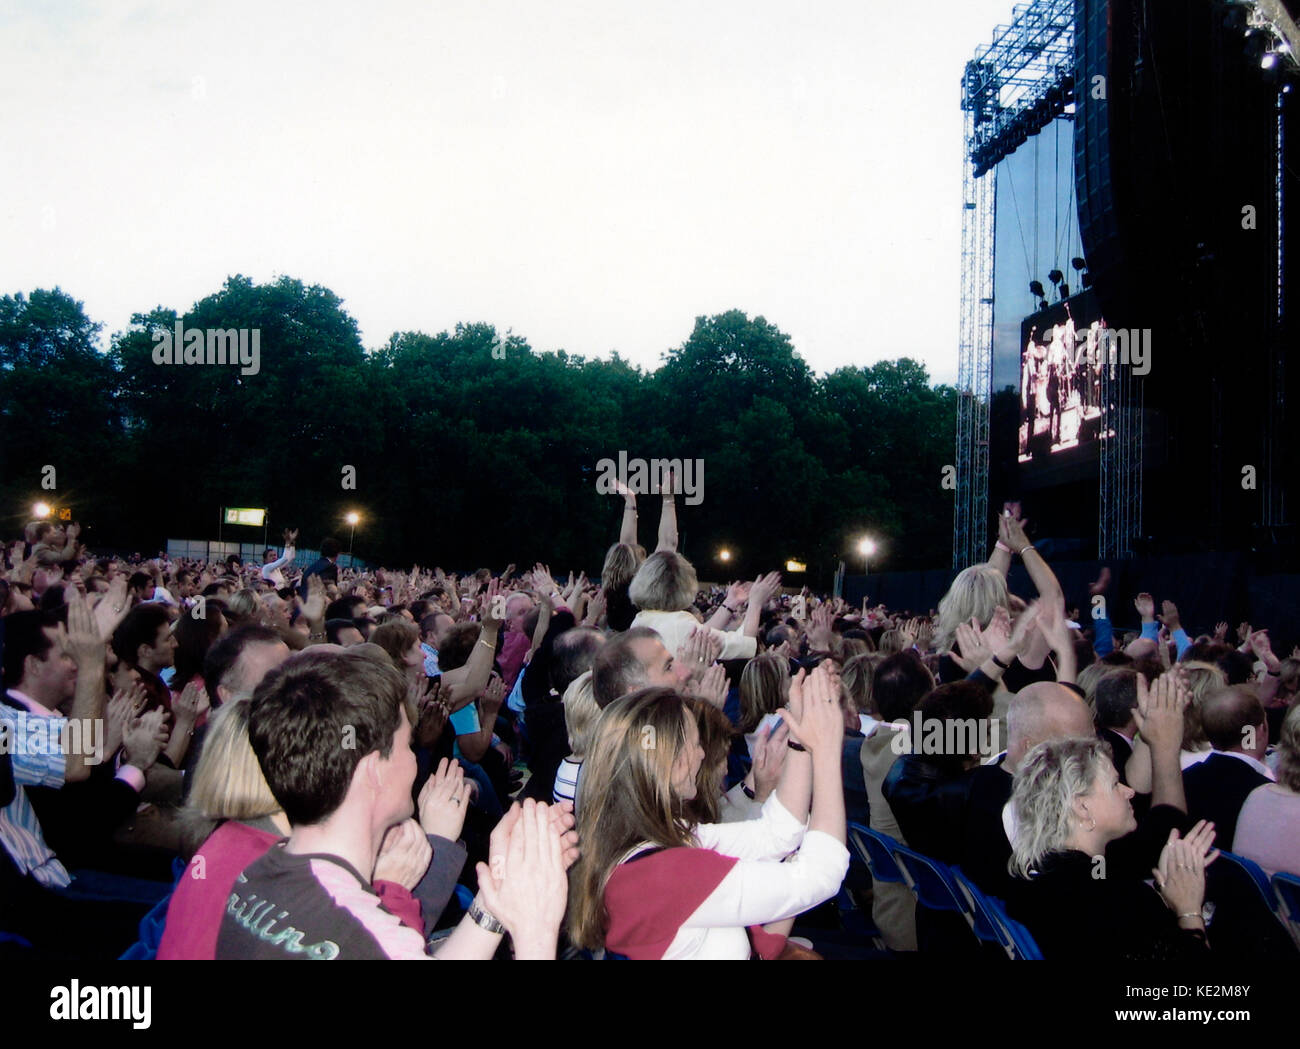 Audience at Simon and Garfunkel  concert, 'Old Friends' tour, Hyde Park, London, 16 July 2004. American folk-rock duo, formed 1964.  Mostly middle aged, grey and white haired groupies standing up, clapping and waving hands. Stock Photo